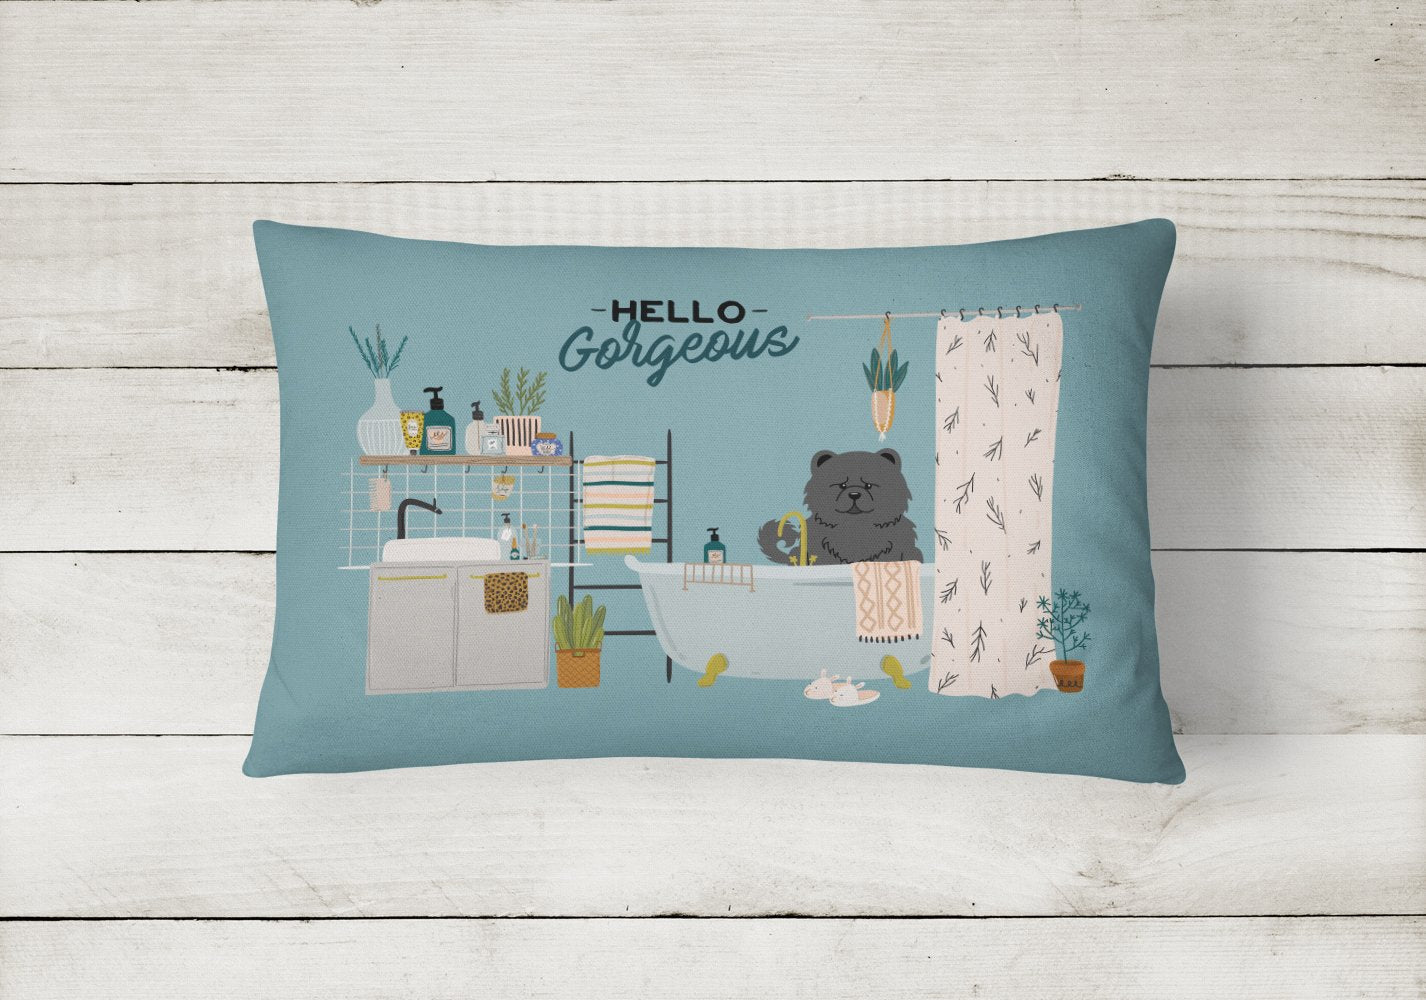 Black Chow Chow in Bathtub Canvas Fabric Decorative Pillow CK7565PW1216 by Caroline's Treasures